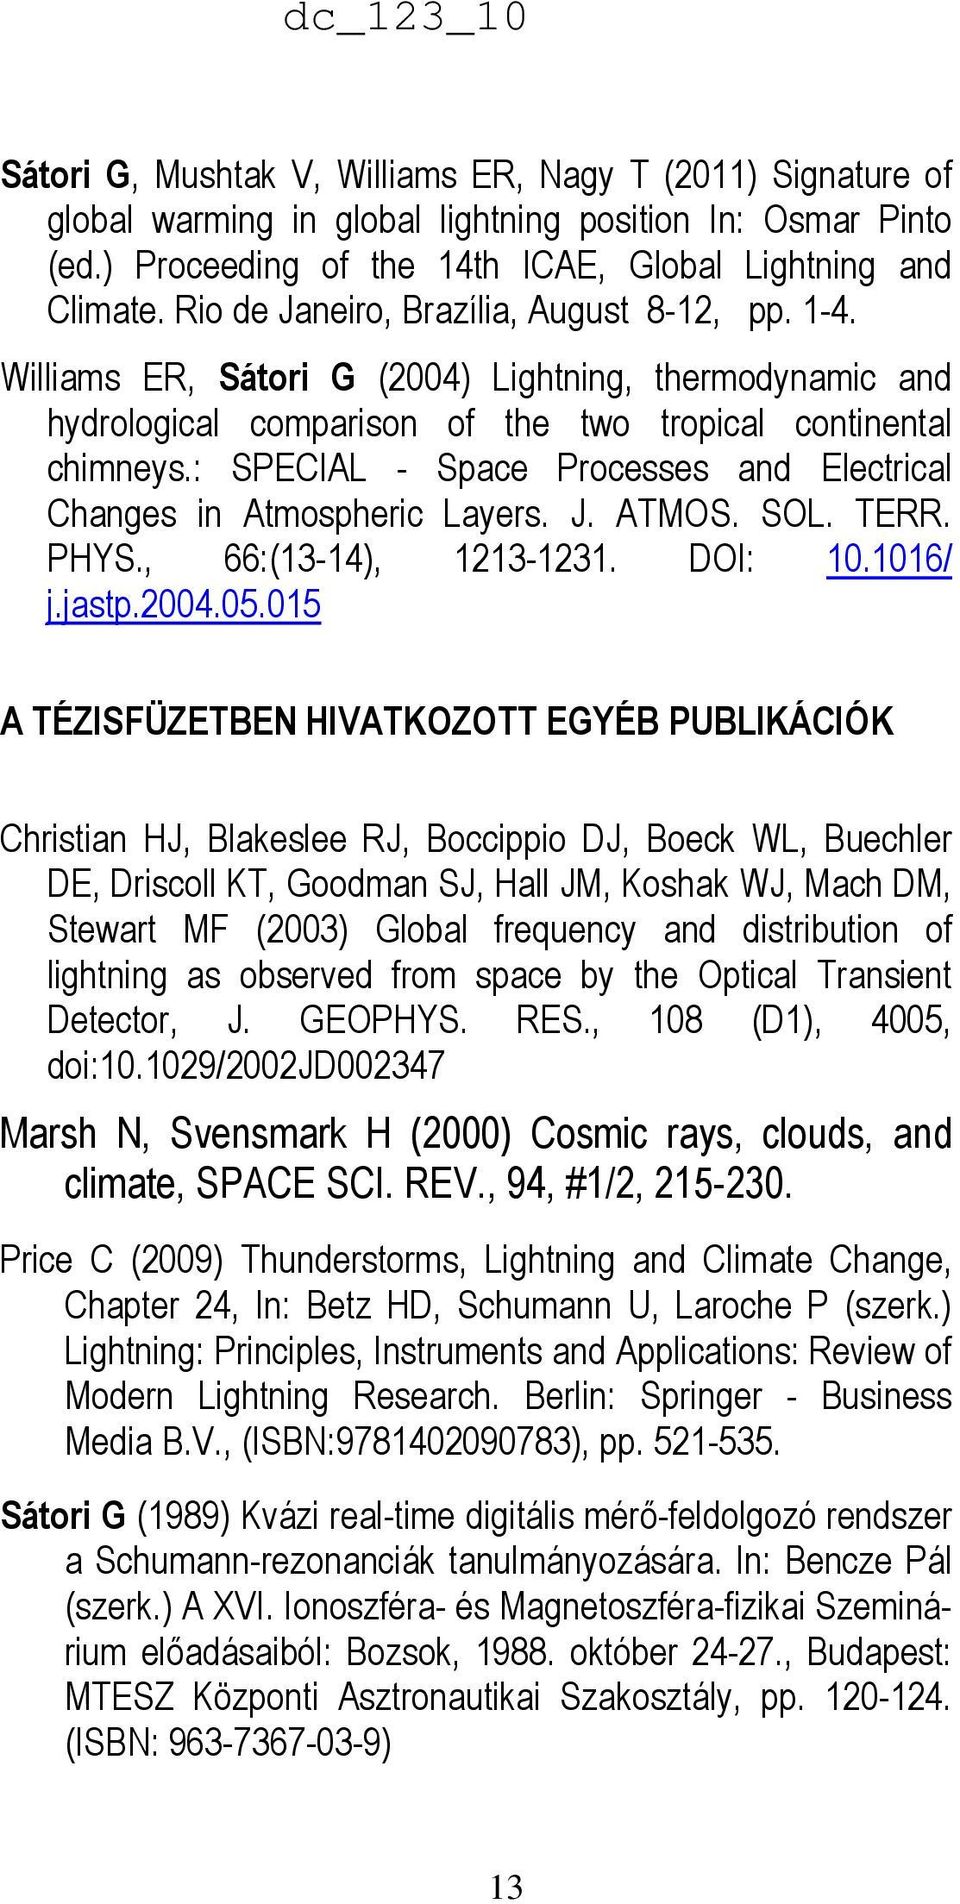 : SPECIAL - Space Processes and Electrical Changes in Atmospheric Layers. J. ATMOS. SOL. TERR. PHYS., 66:(13-14), 1213-1231. DOI: 10.1016/ j.jastp.2004.05.